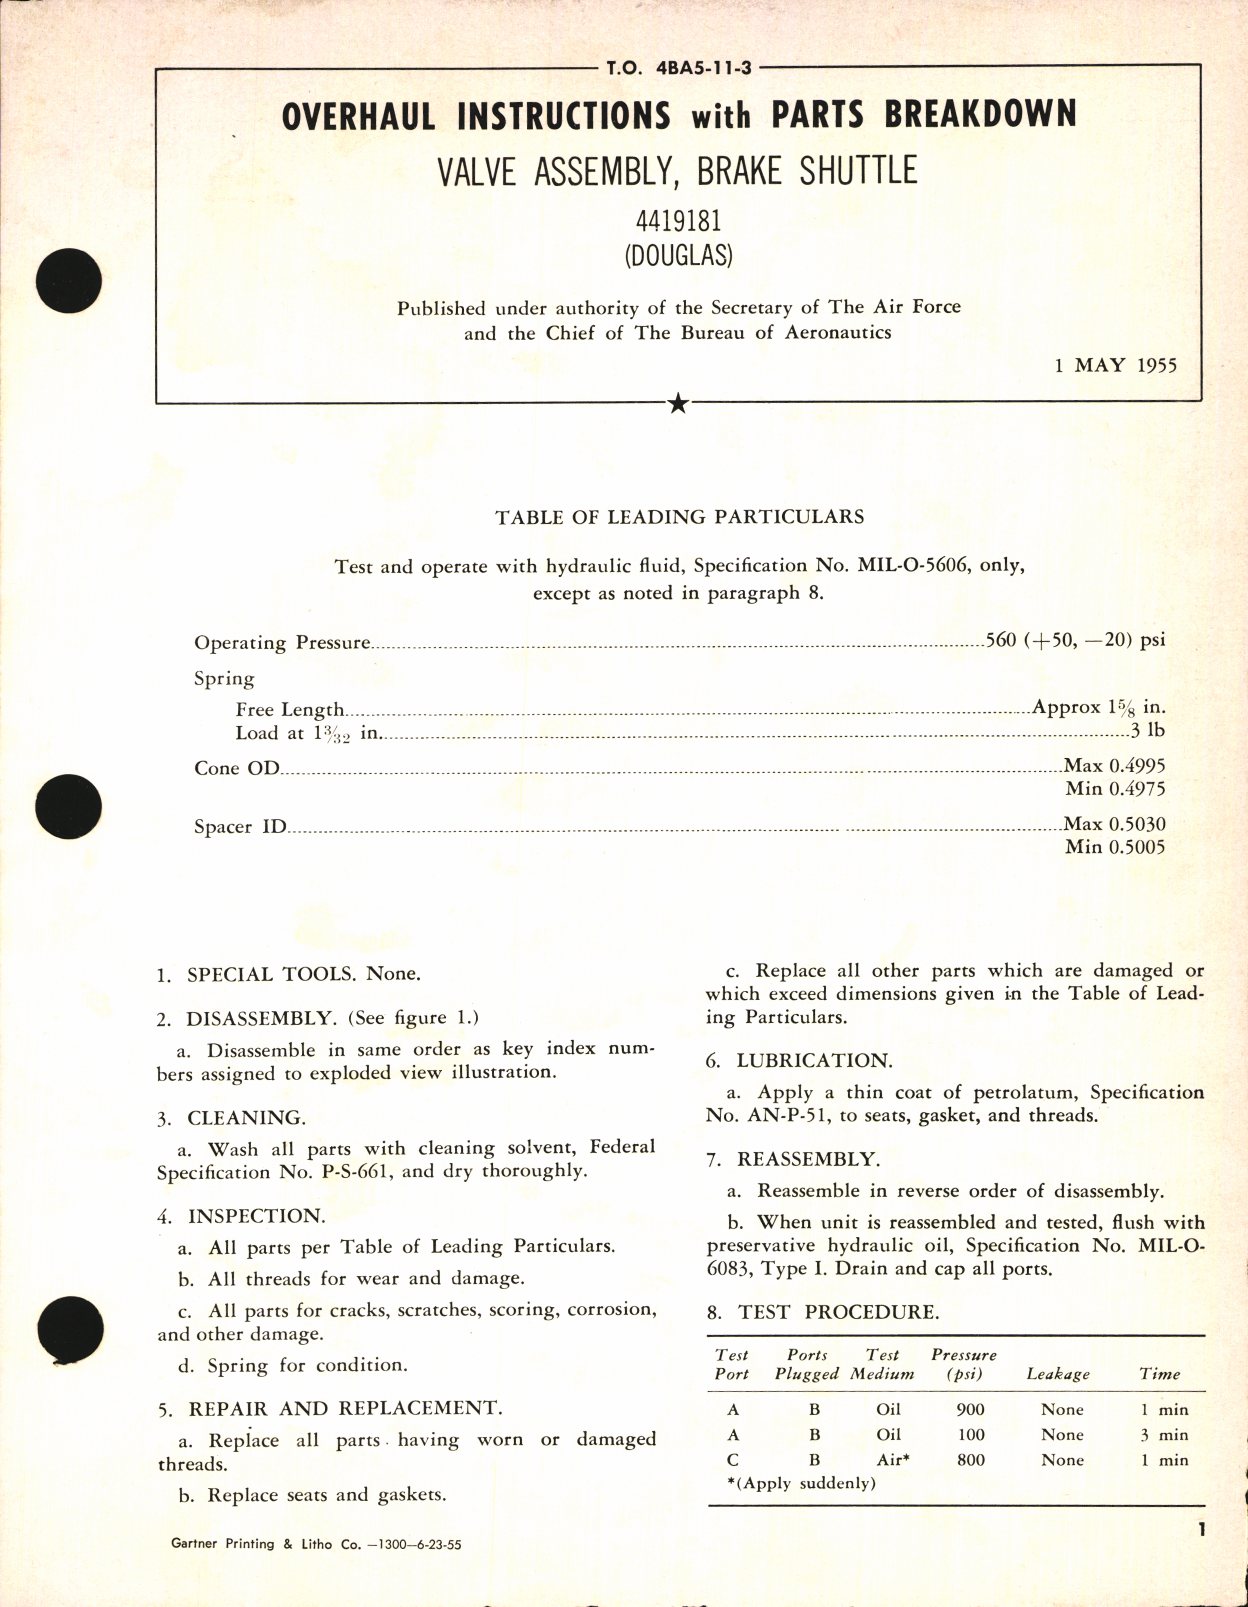 Sample page 1 from AirCorps Library document: Overhaul Instructions with Parts Breakdown for Valve Assembly, Brake Shuttle